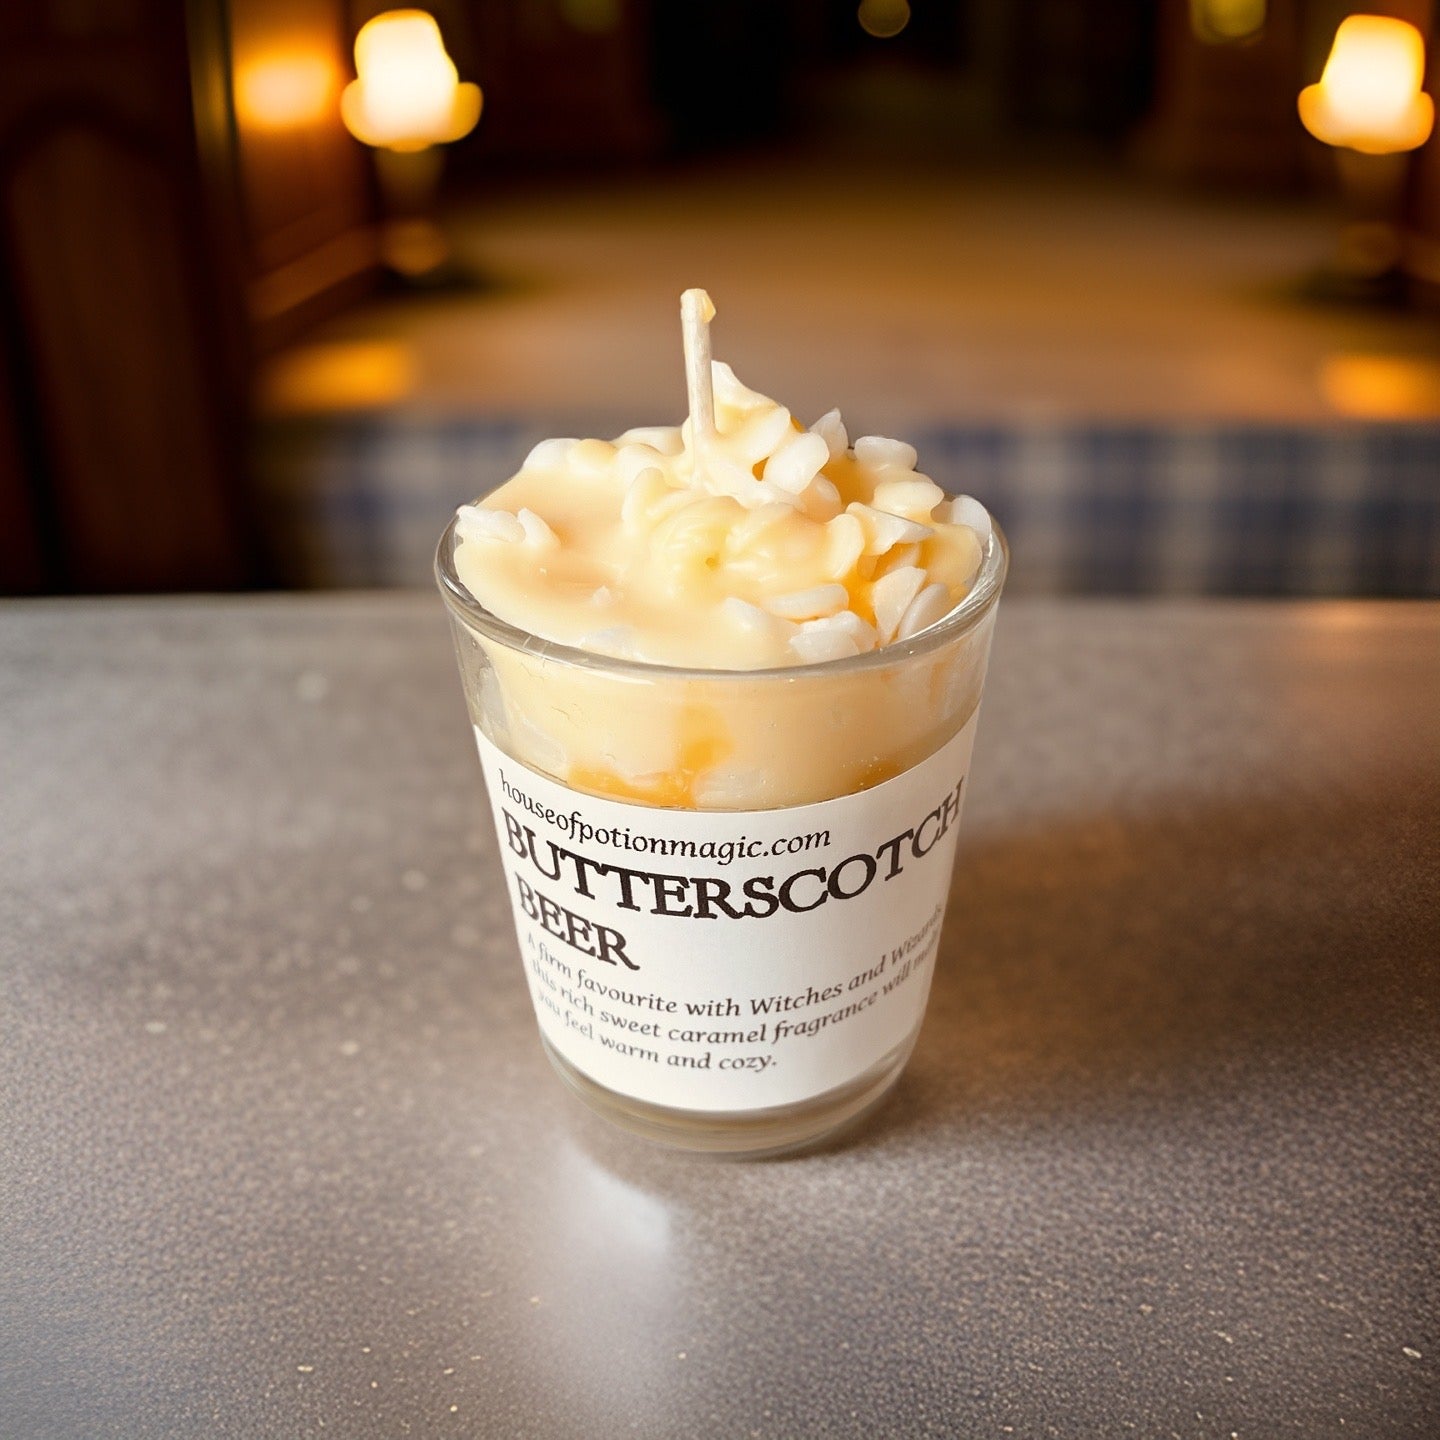 Butterscotch Beer Candle 75g